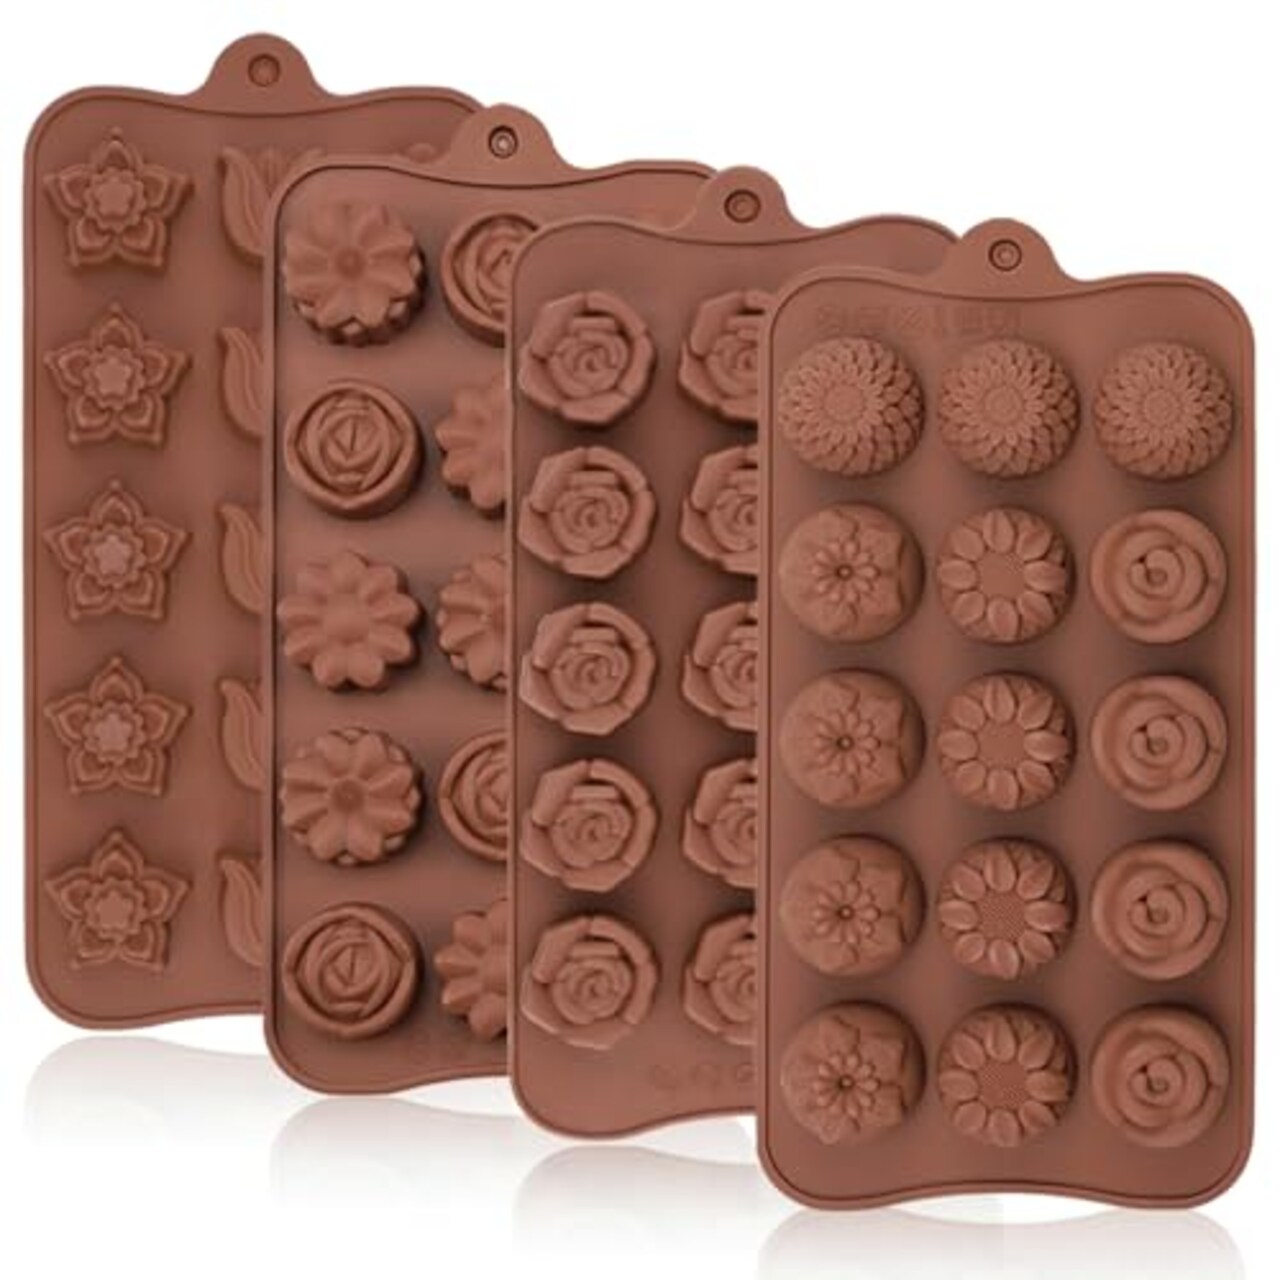 JOERSH Silicone Chocolate Molds for Fat Bombs Snacks & Truffles, 4PCS  Flower Shape Silicone Molds Caramel Hard Candy Mold (11 Different Flowers)